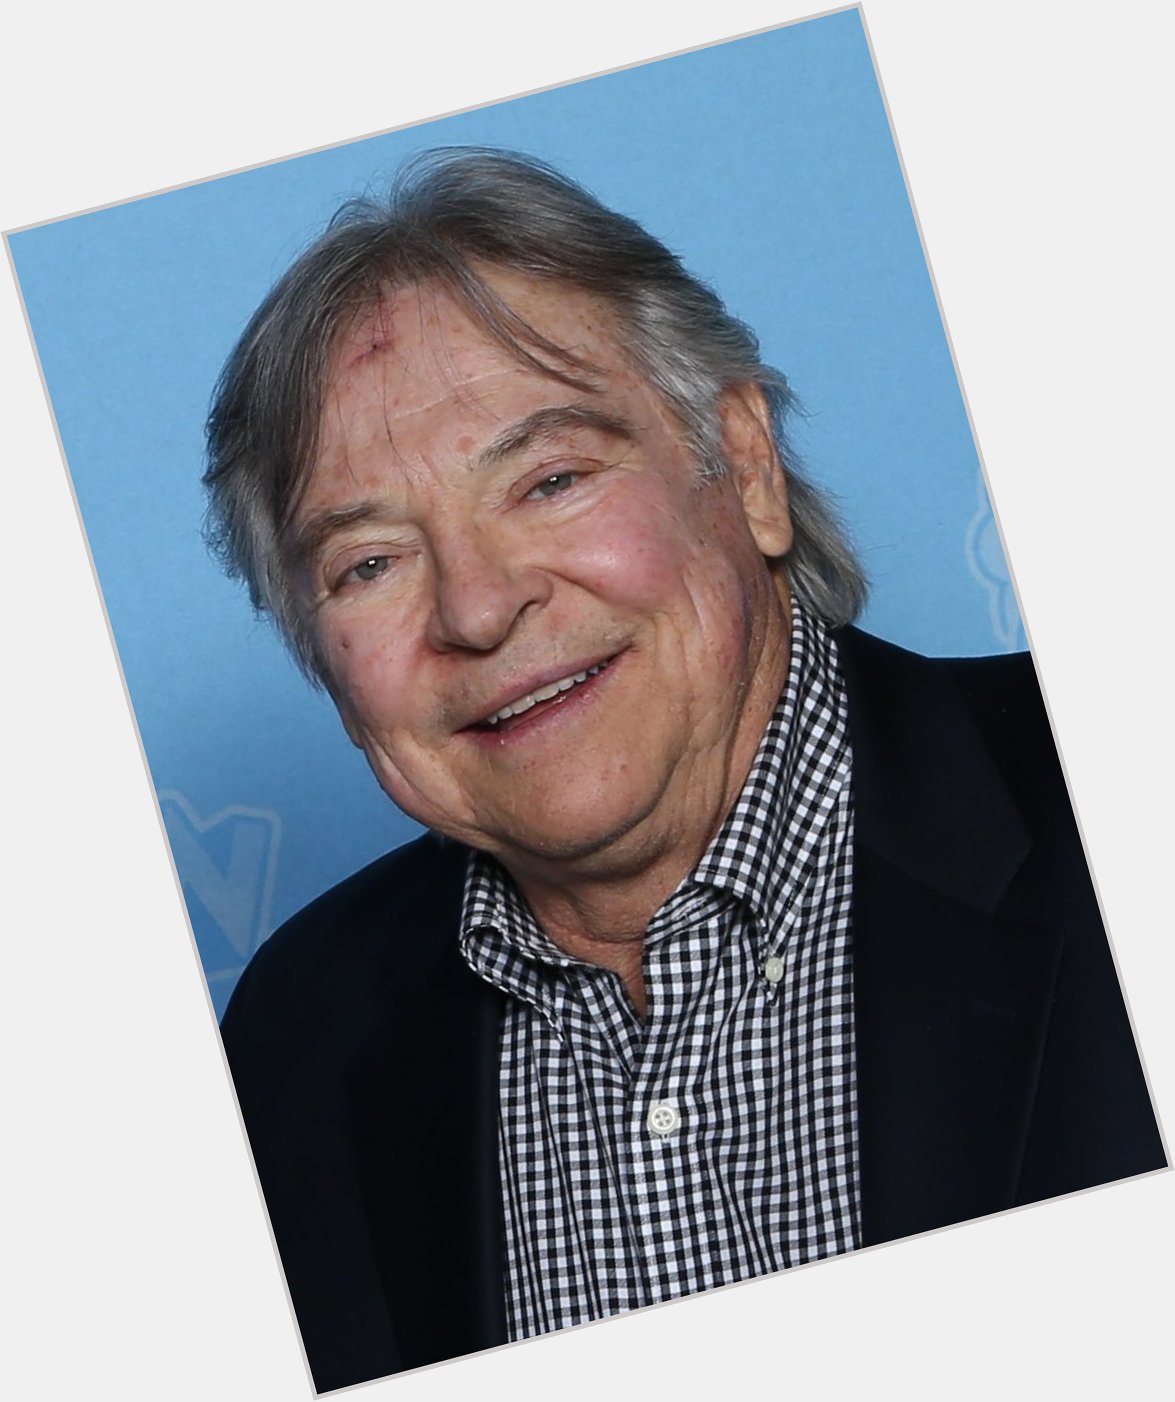 Happy Birthday to Frank Welker, the voices of G1 Megatron, Transformers Prime Megatron and Scooby Doo 